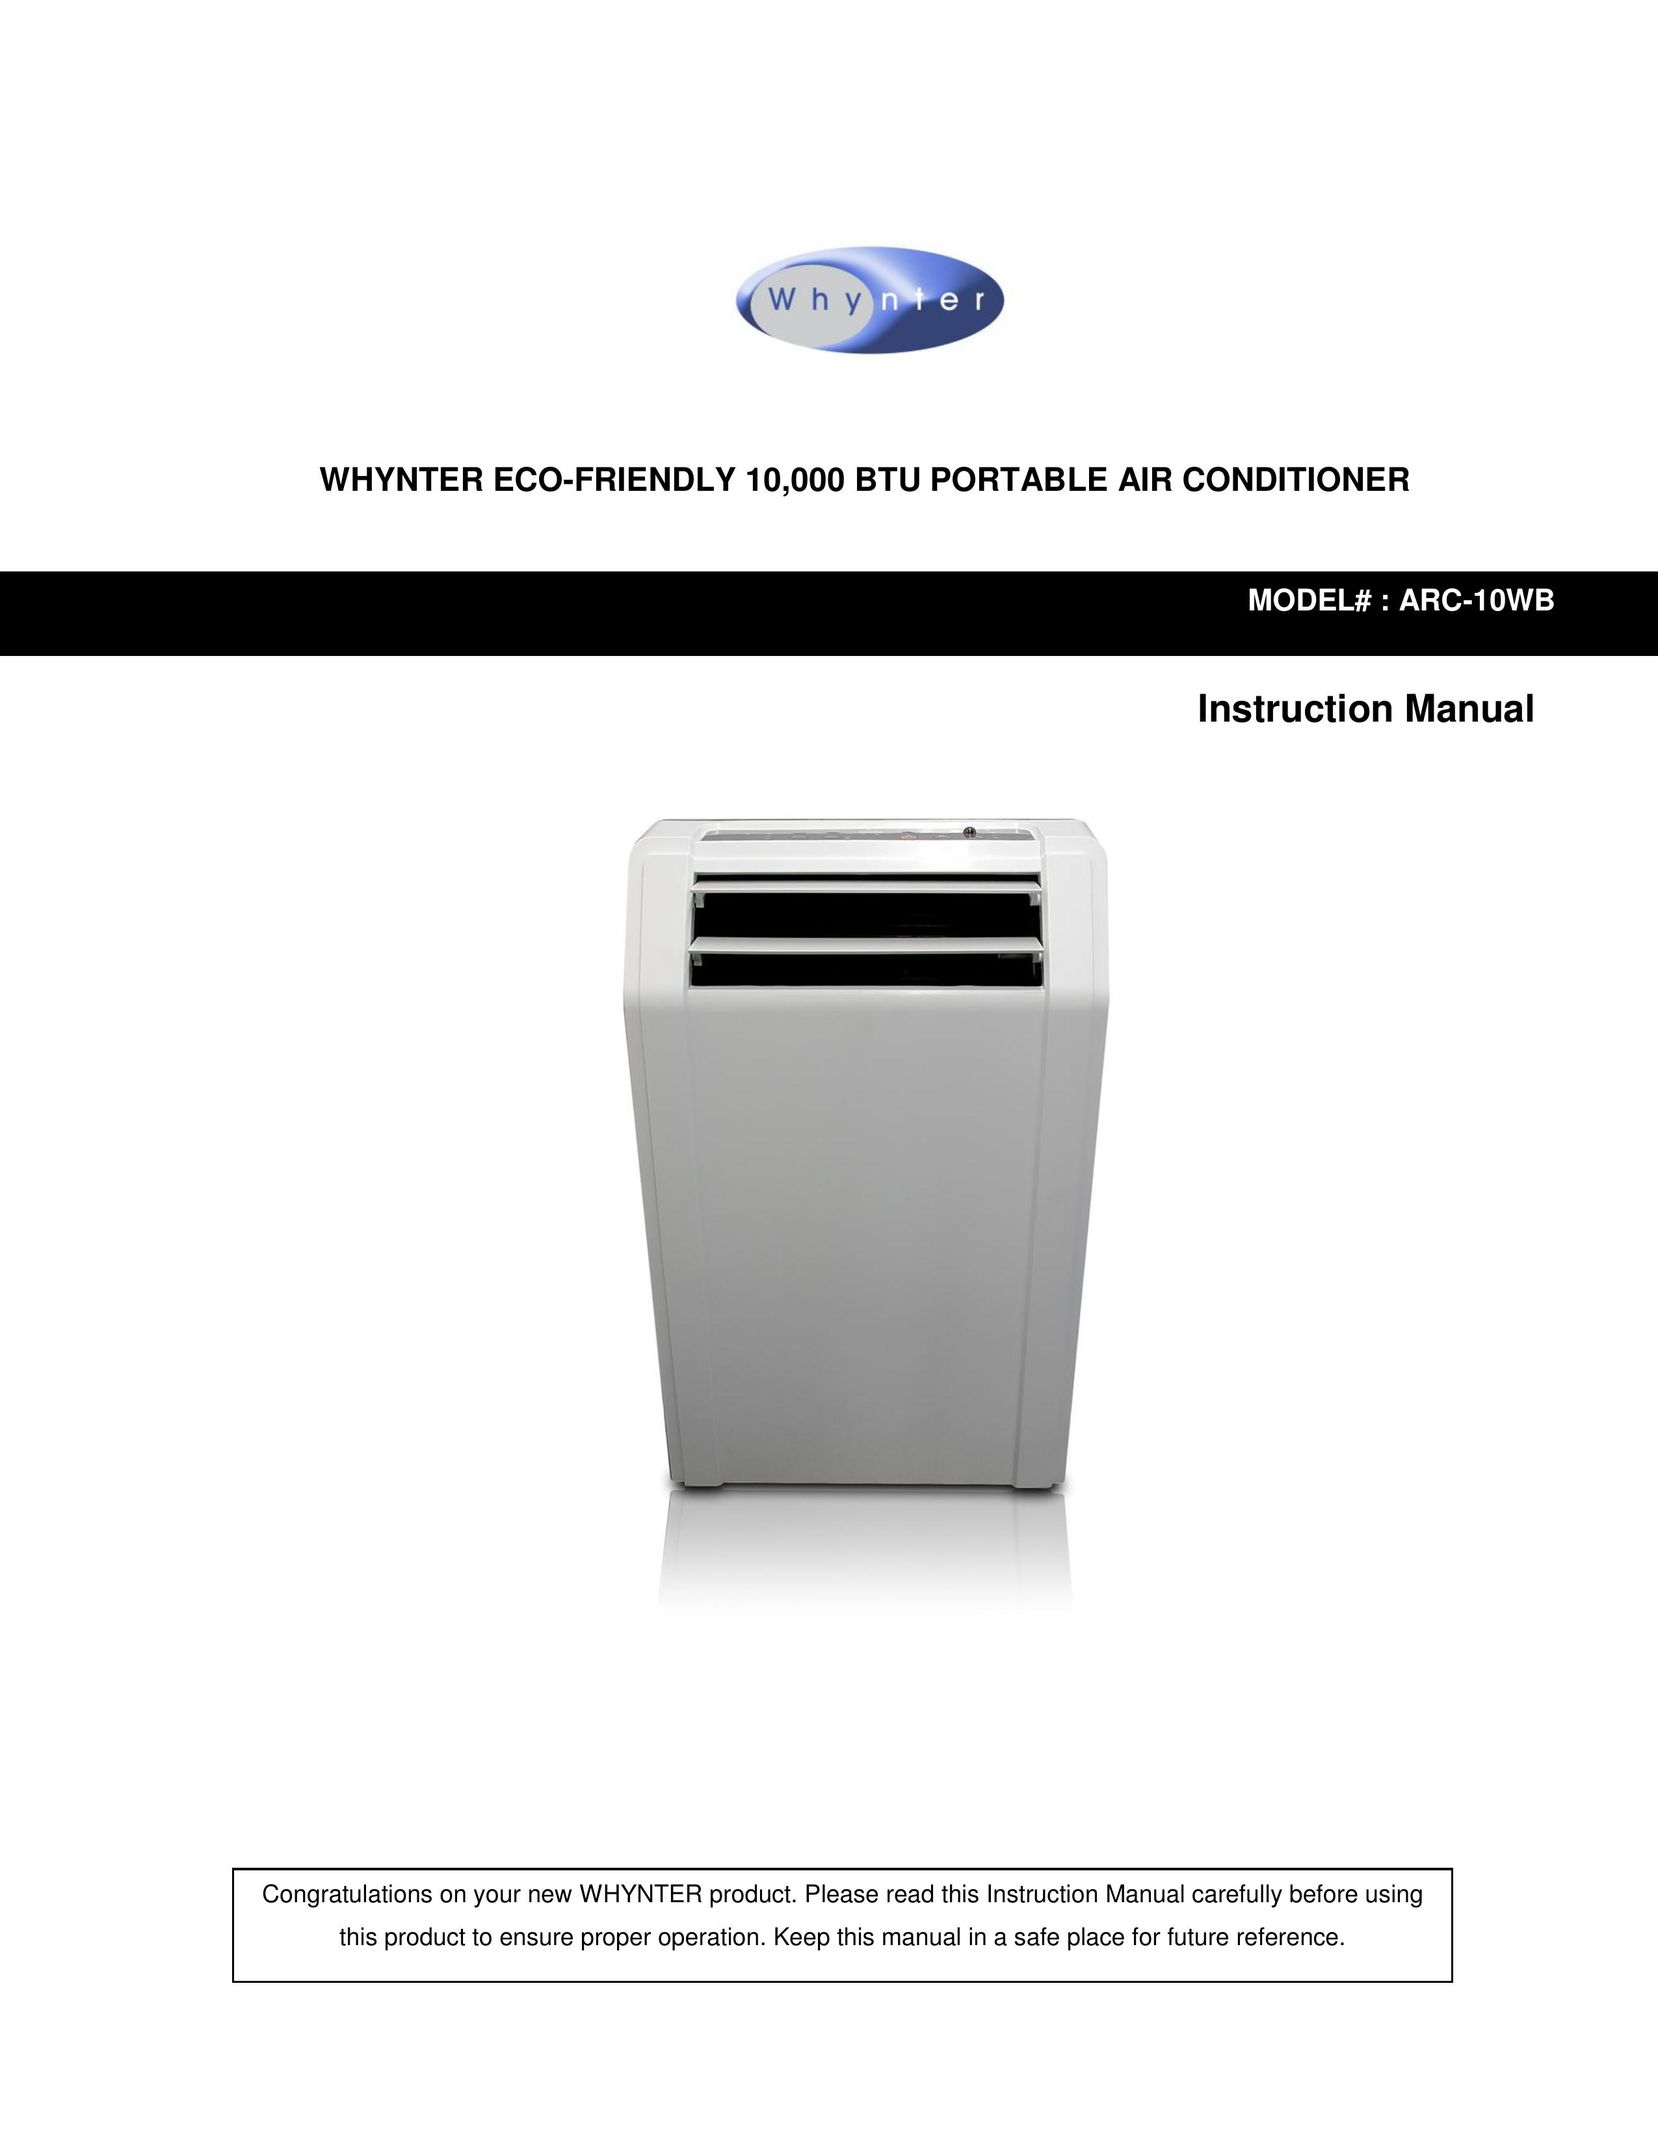 Whynter ARC-10WB Air Conditioner User Manual